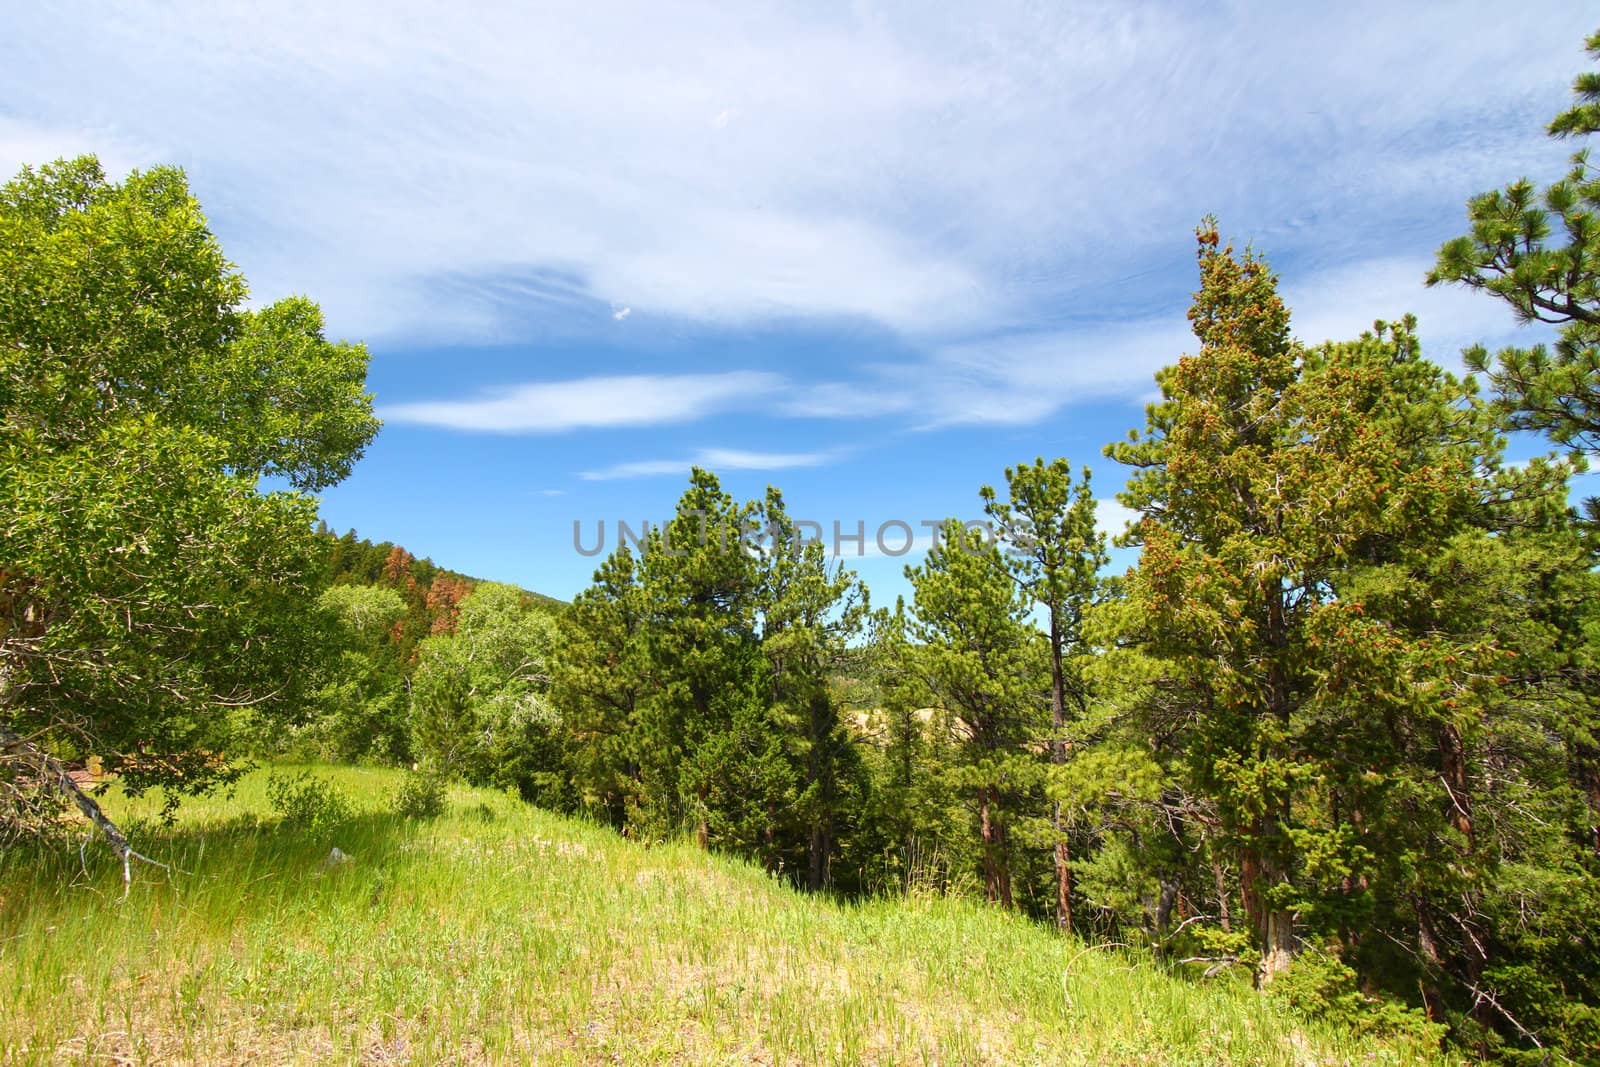 Trees grow on a hillside in the Bighorn National Forest of Wyoming.